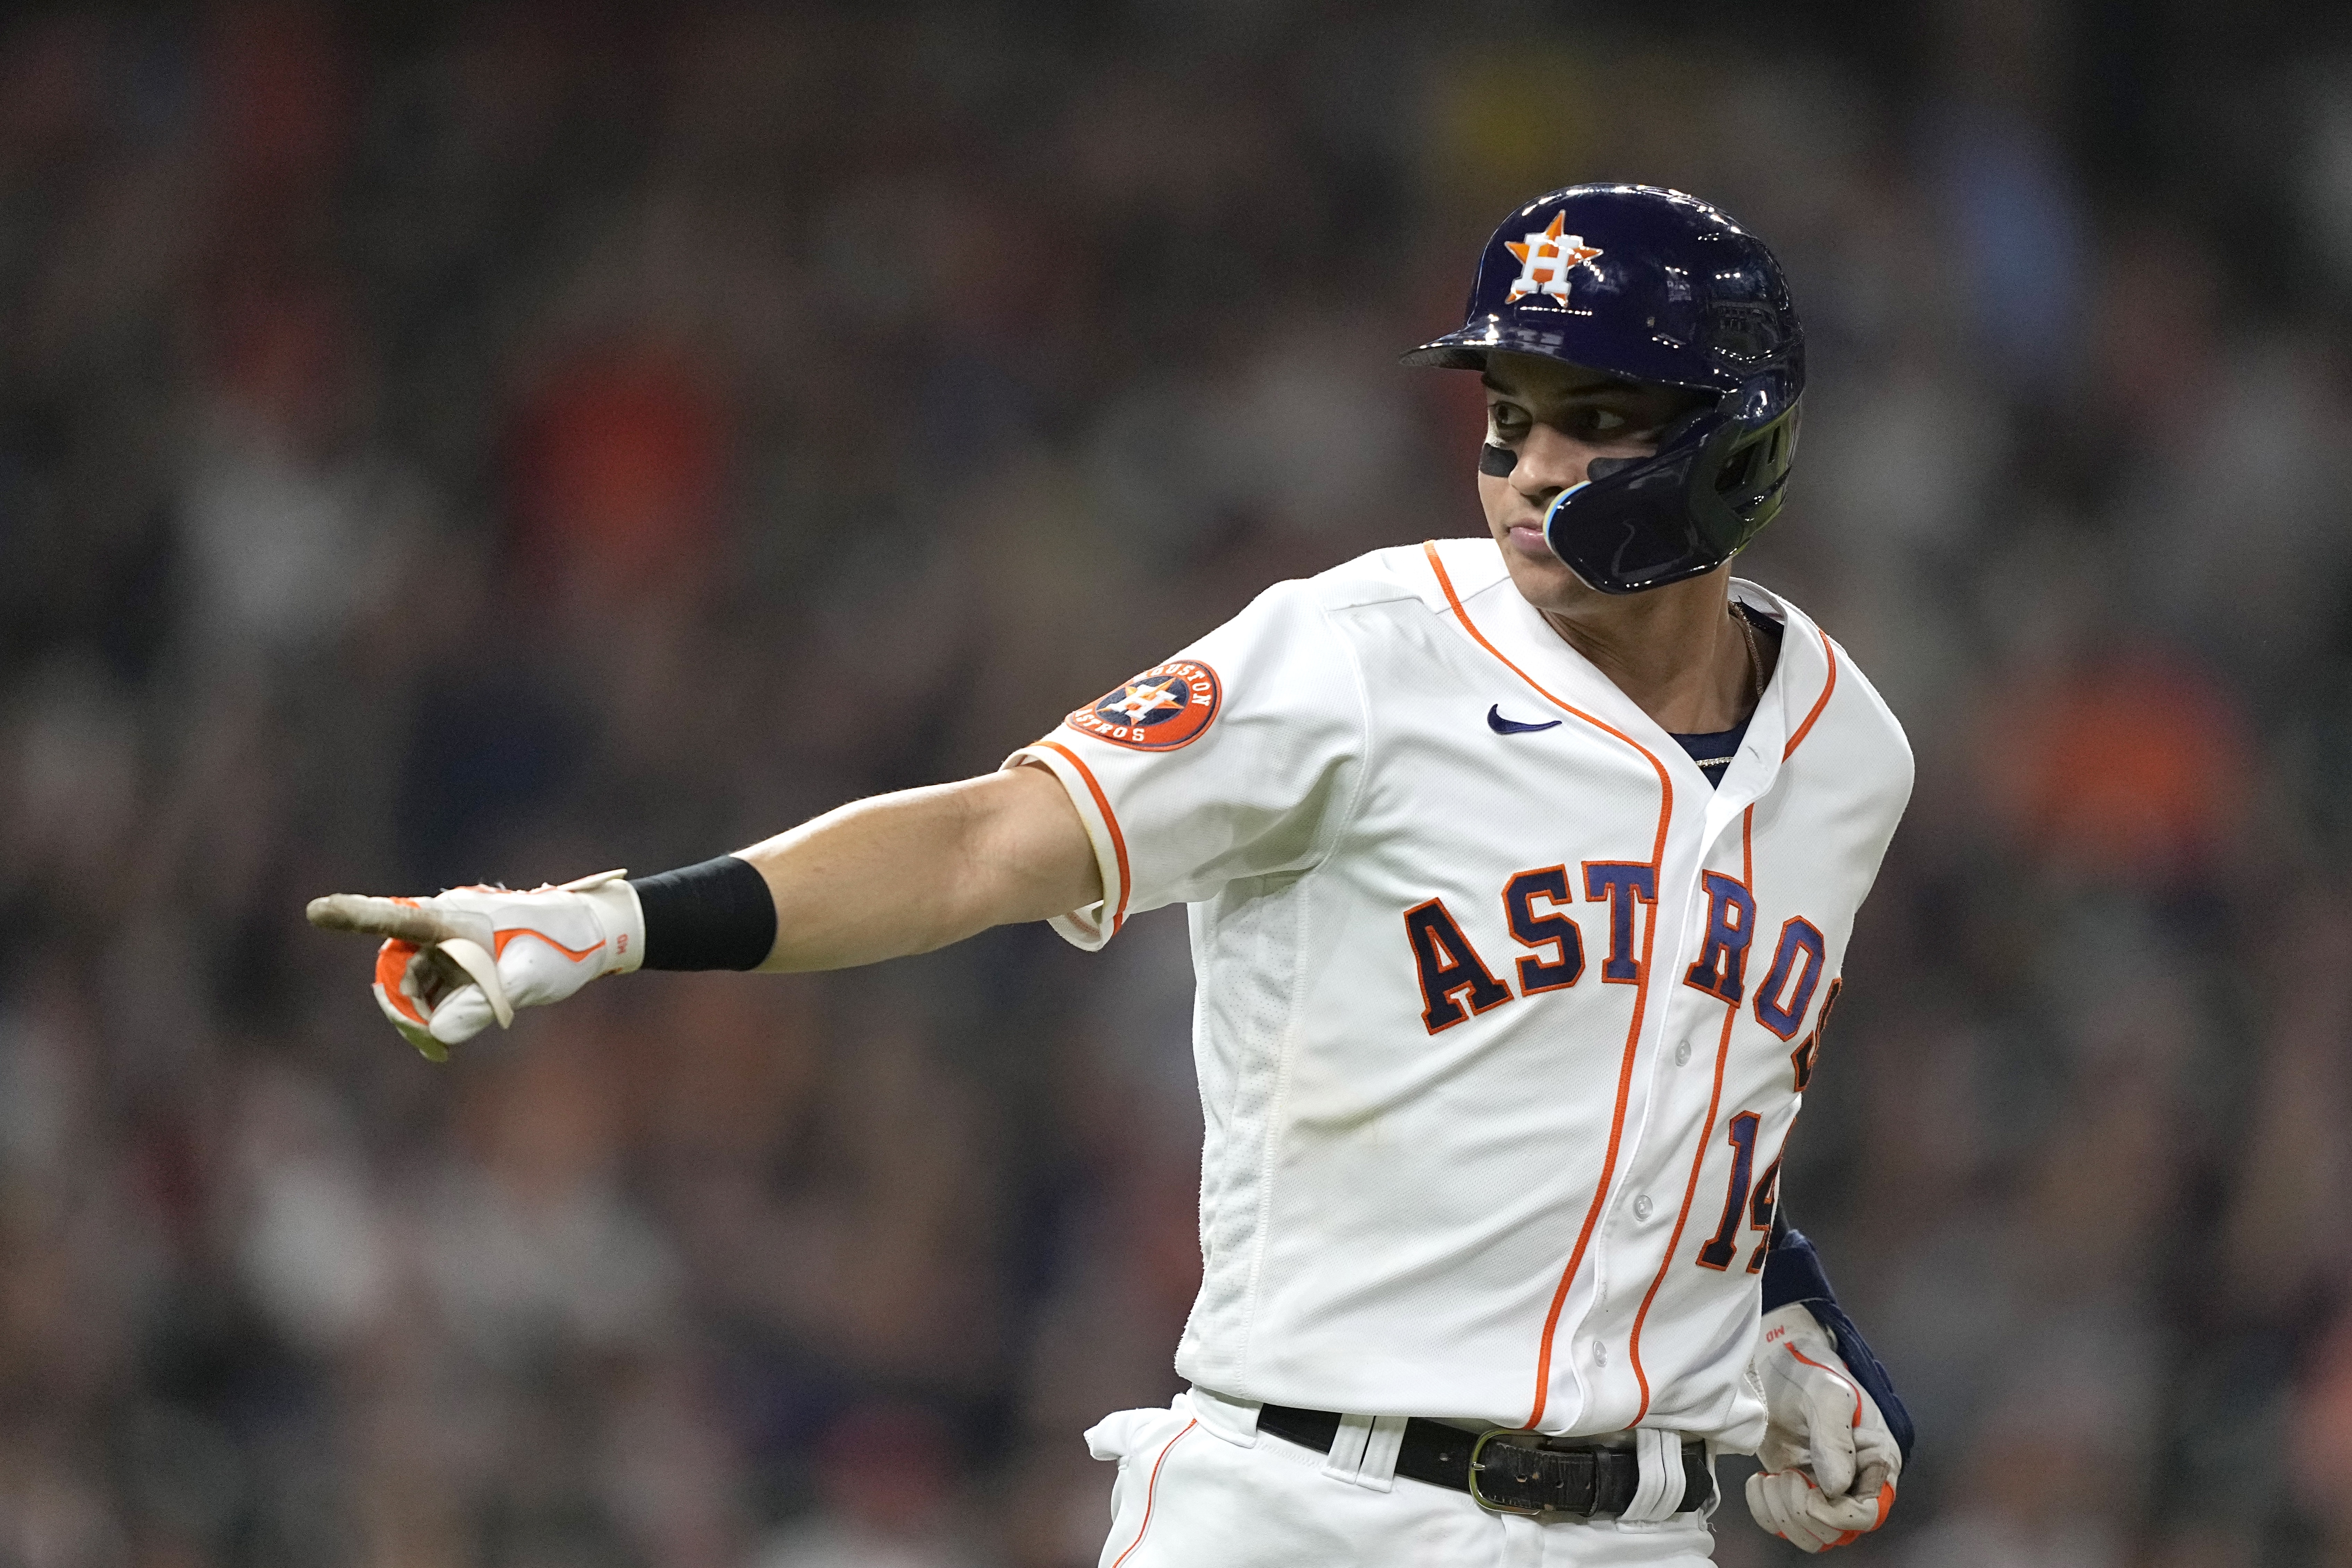 Elation and heartbreak: The Astros' history in Game 6 of playoff series